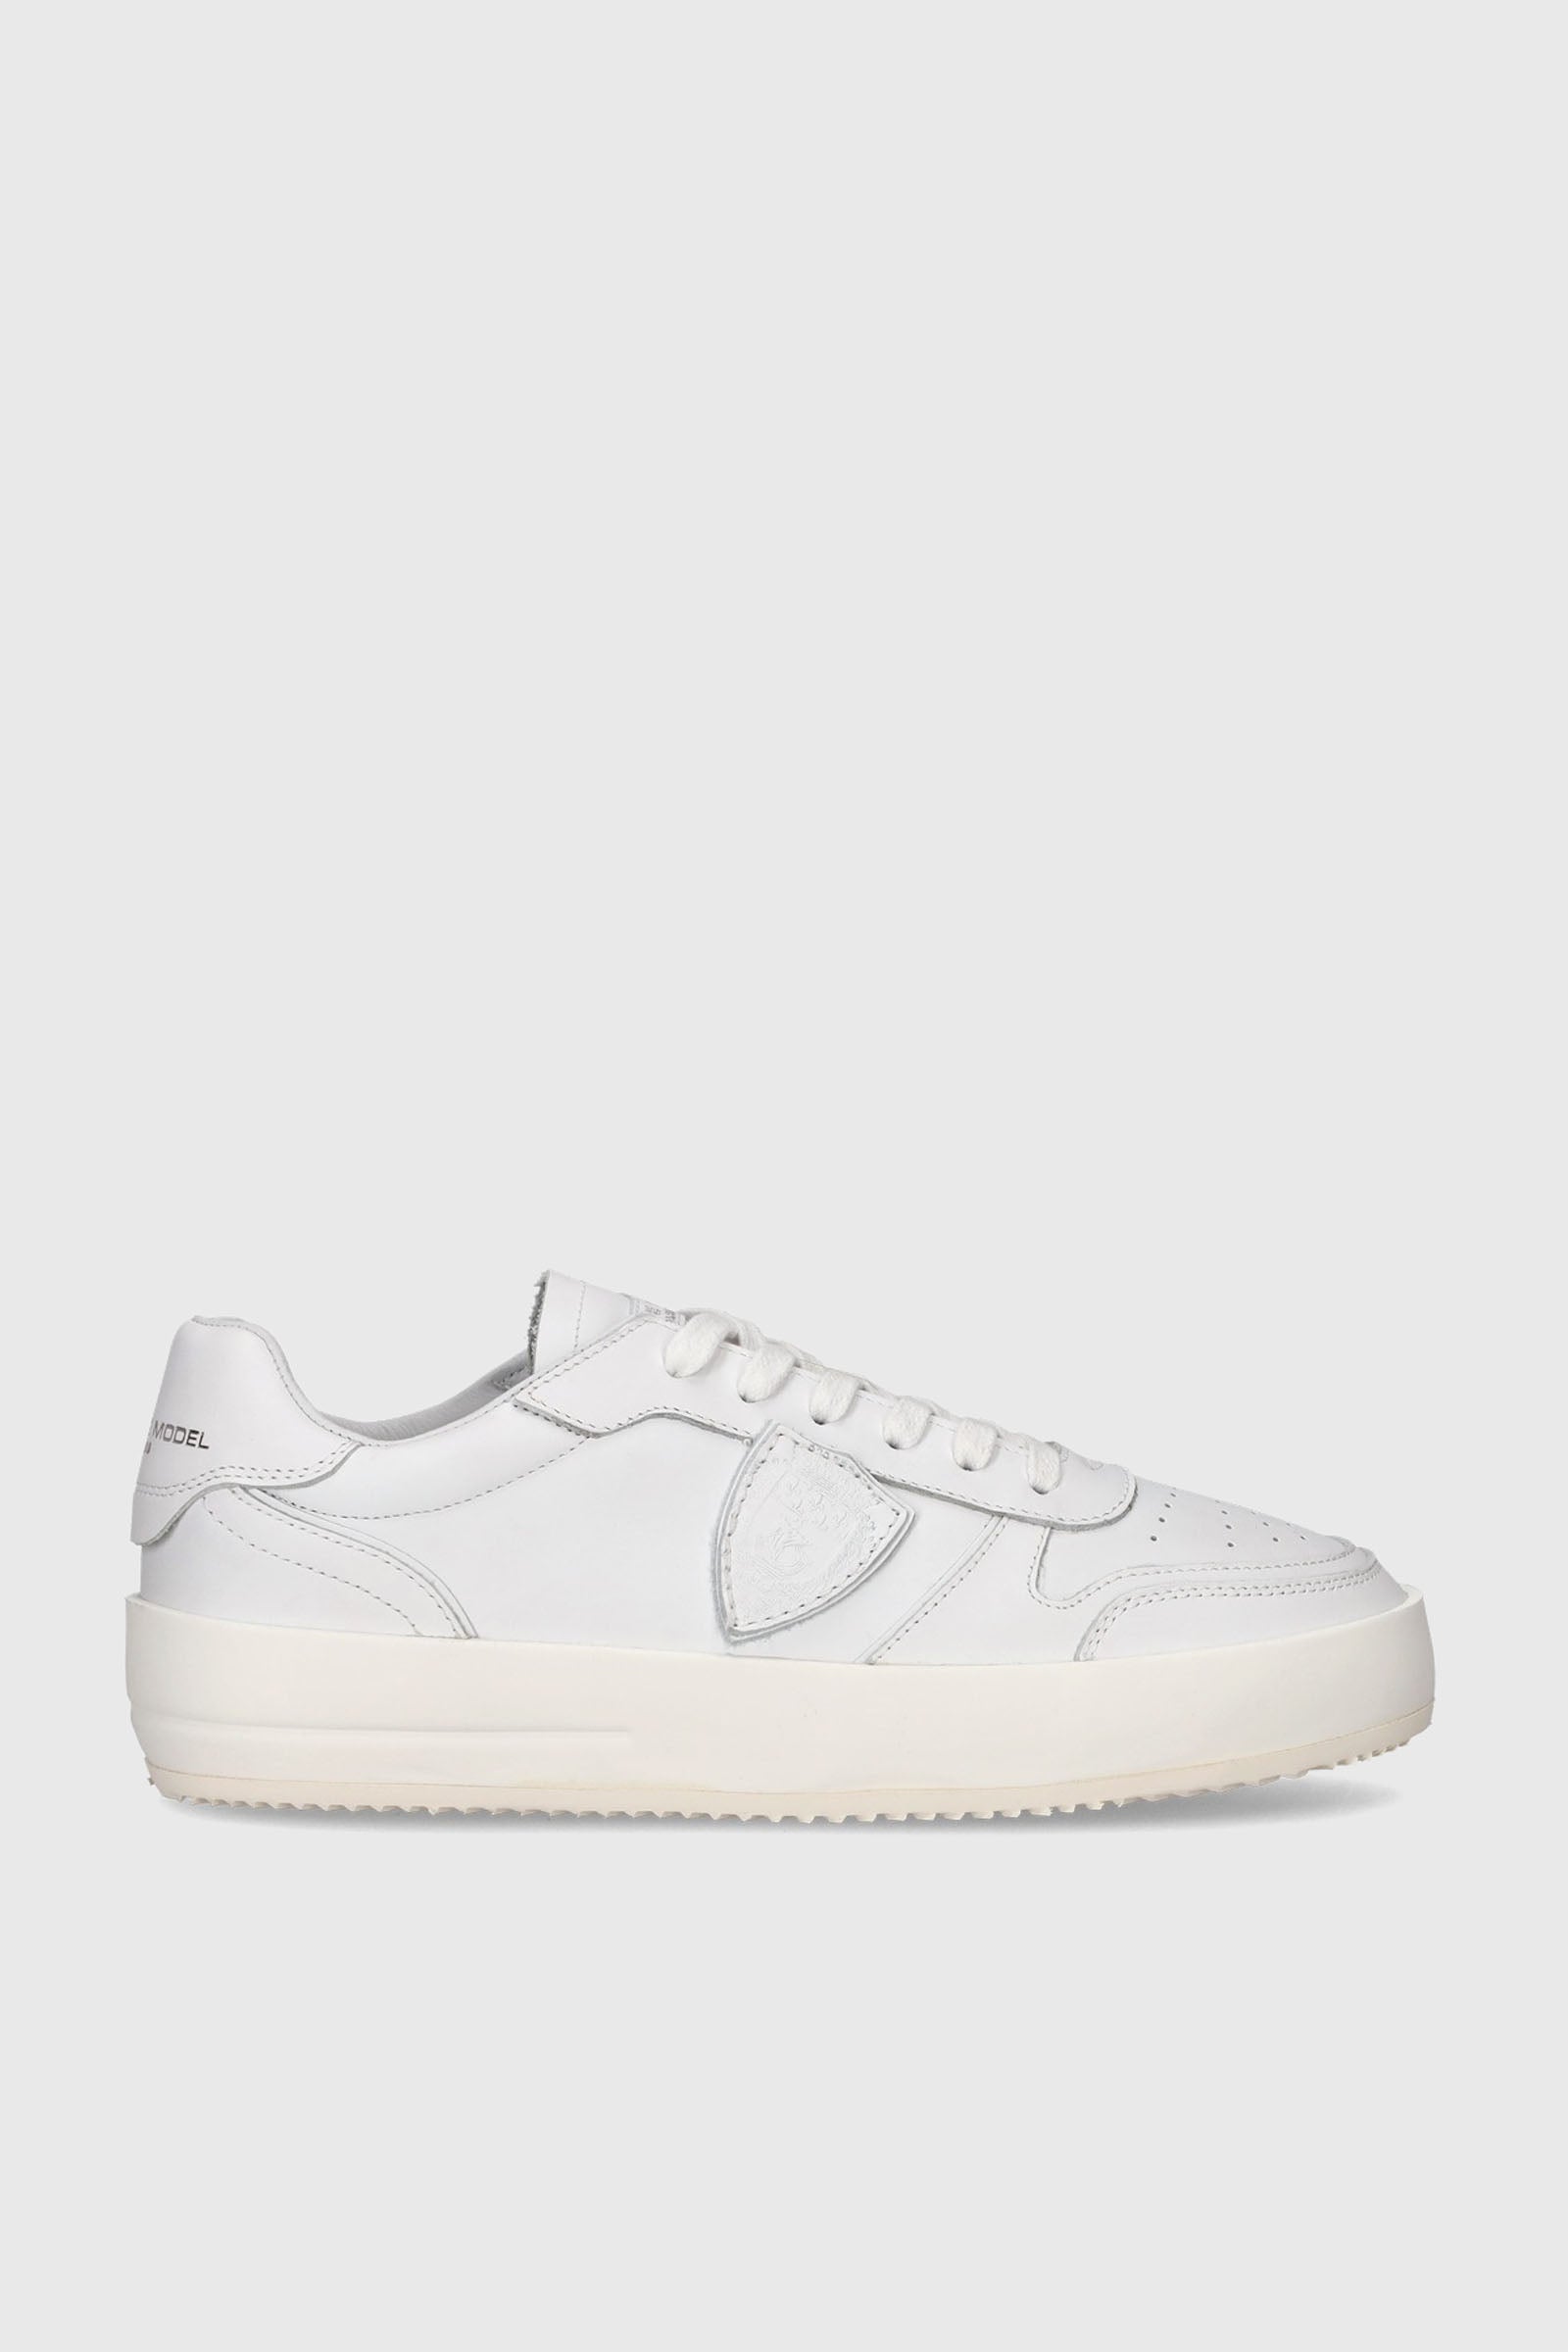 Philippe Model Sneaker Nice Veau Leather White - 1